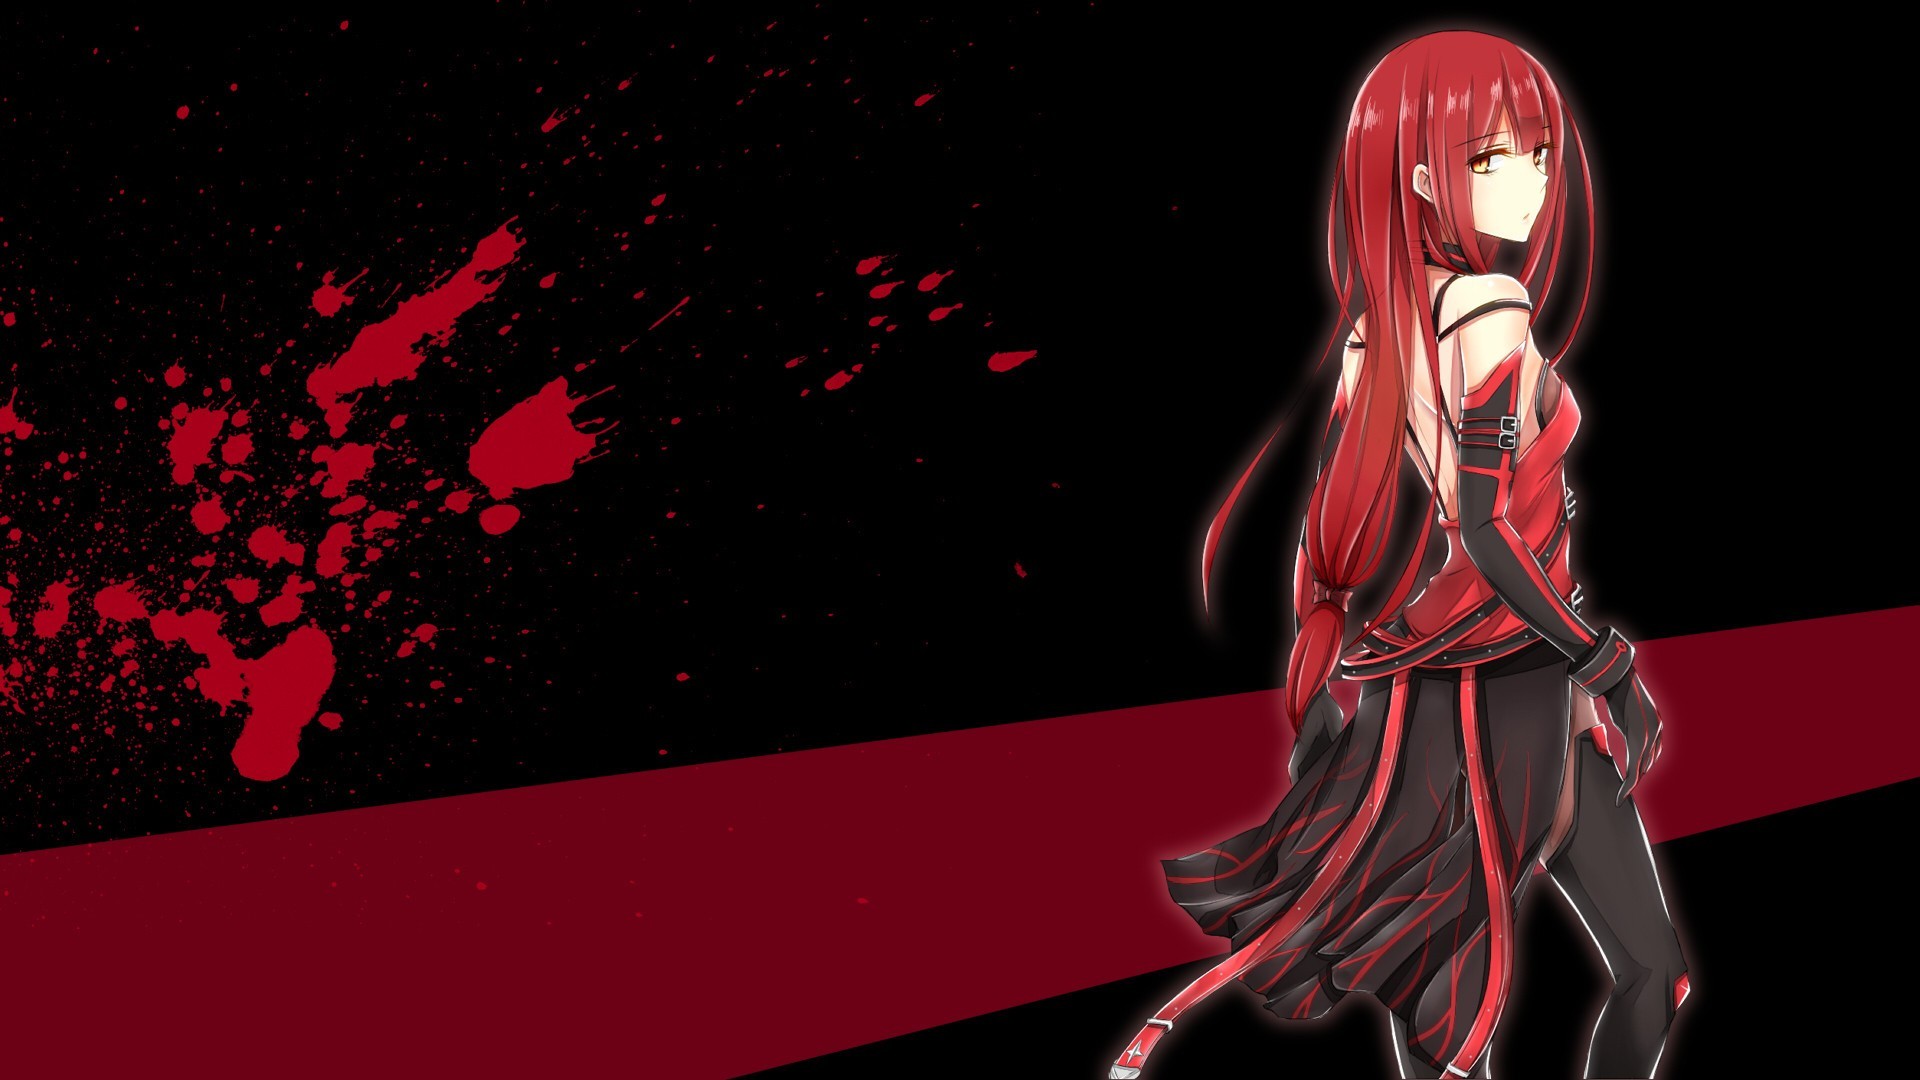 Red And Black Anime Girl Wallpapers - Wallpaper Cave